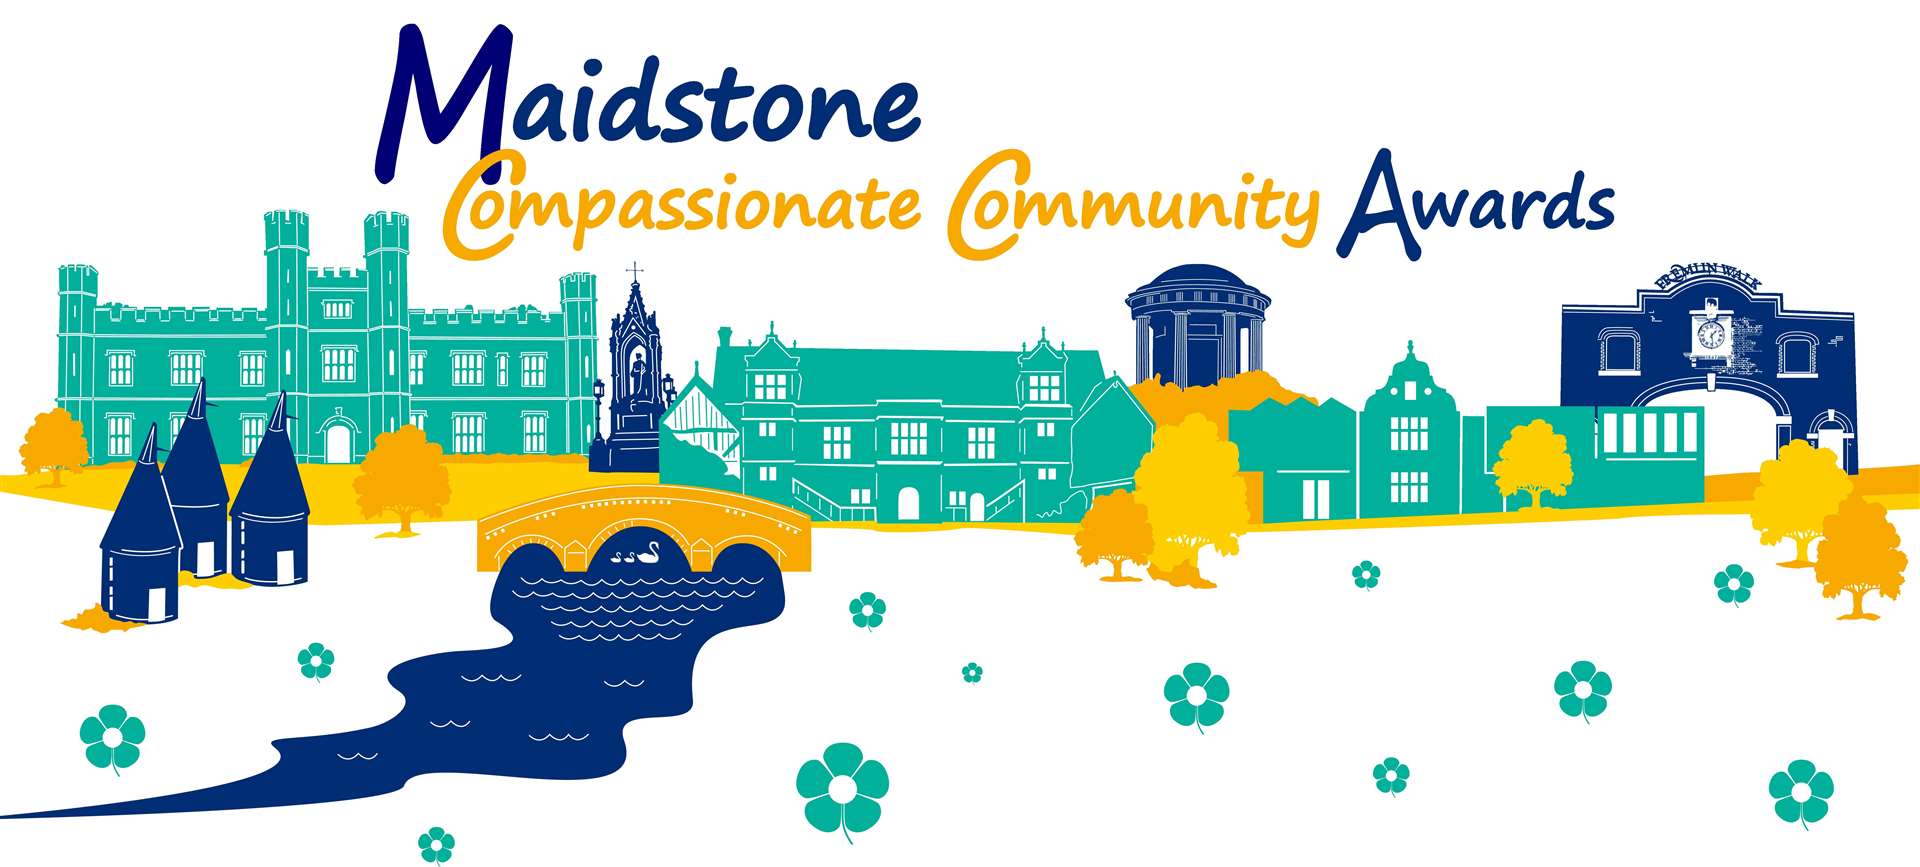 Maidstone Borough Council and Heart of Kent Hospice have launched the Compassionate Community Awards 2021